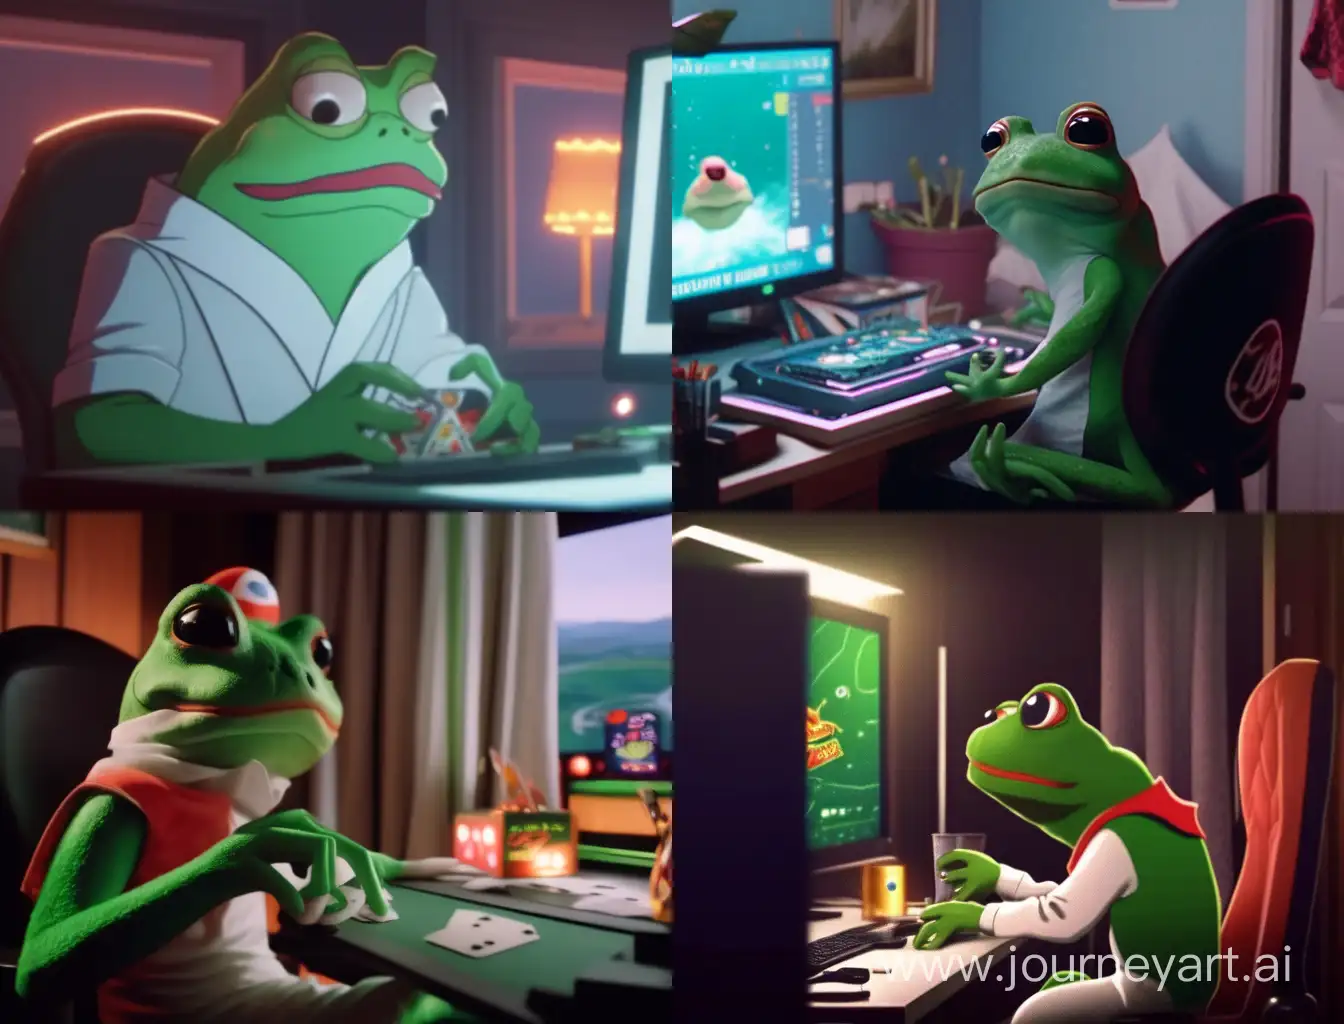 pepe frog playing online casino in the room for youtube header 2048 × 1152 pixels